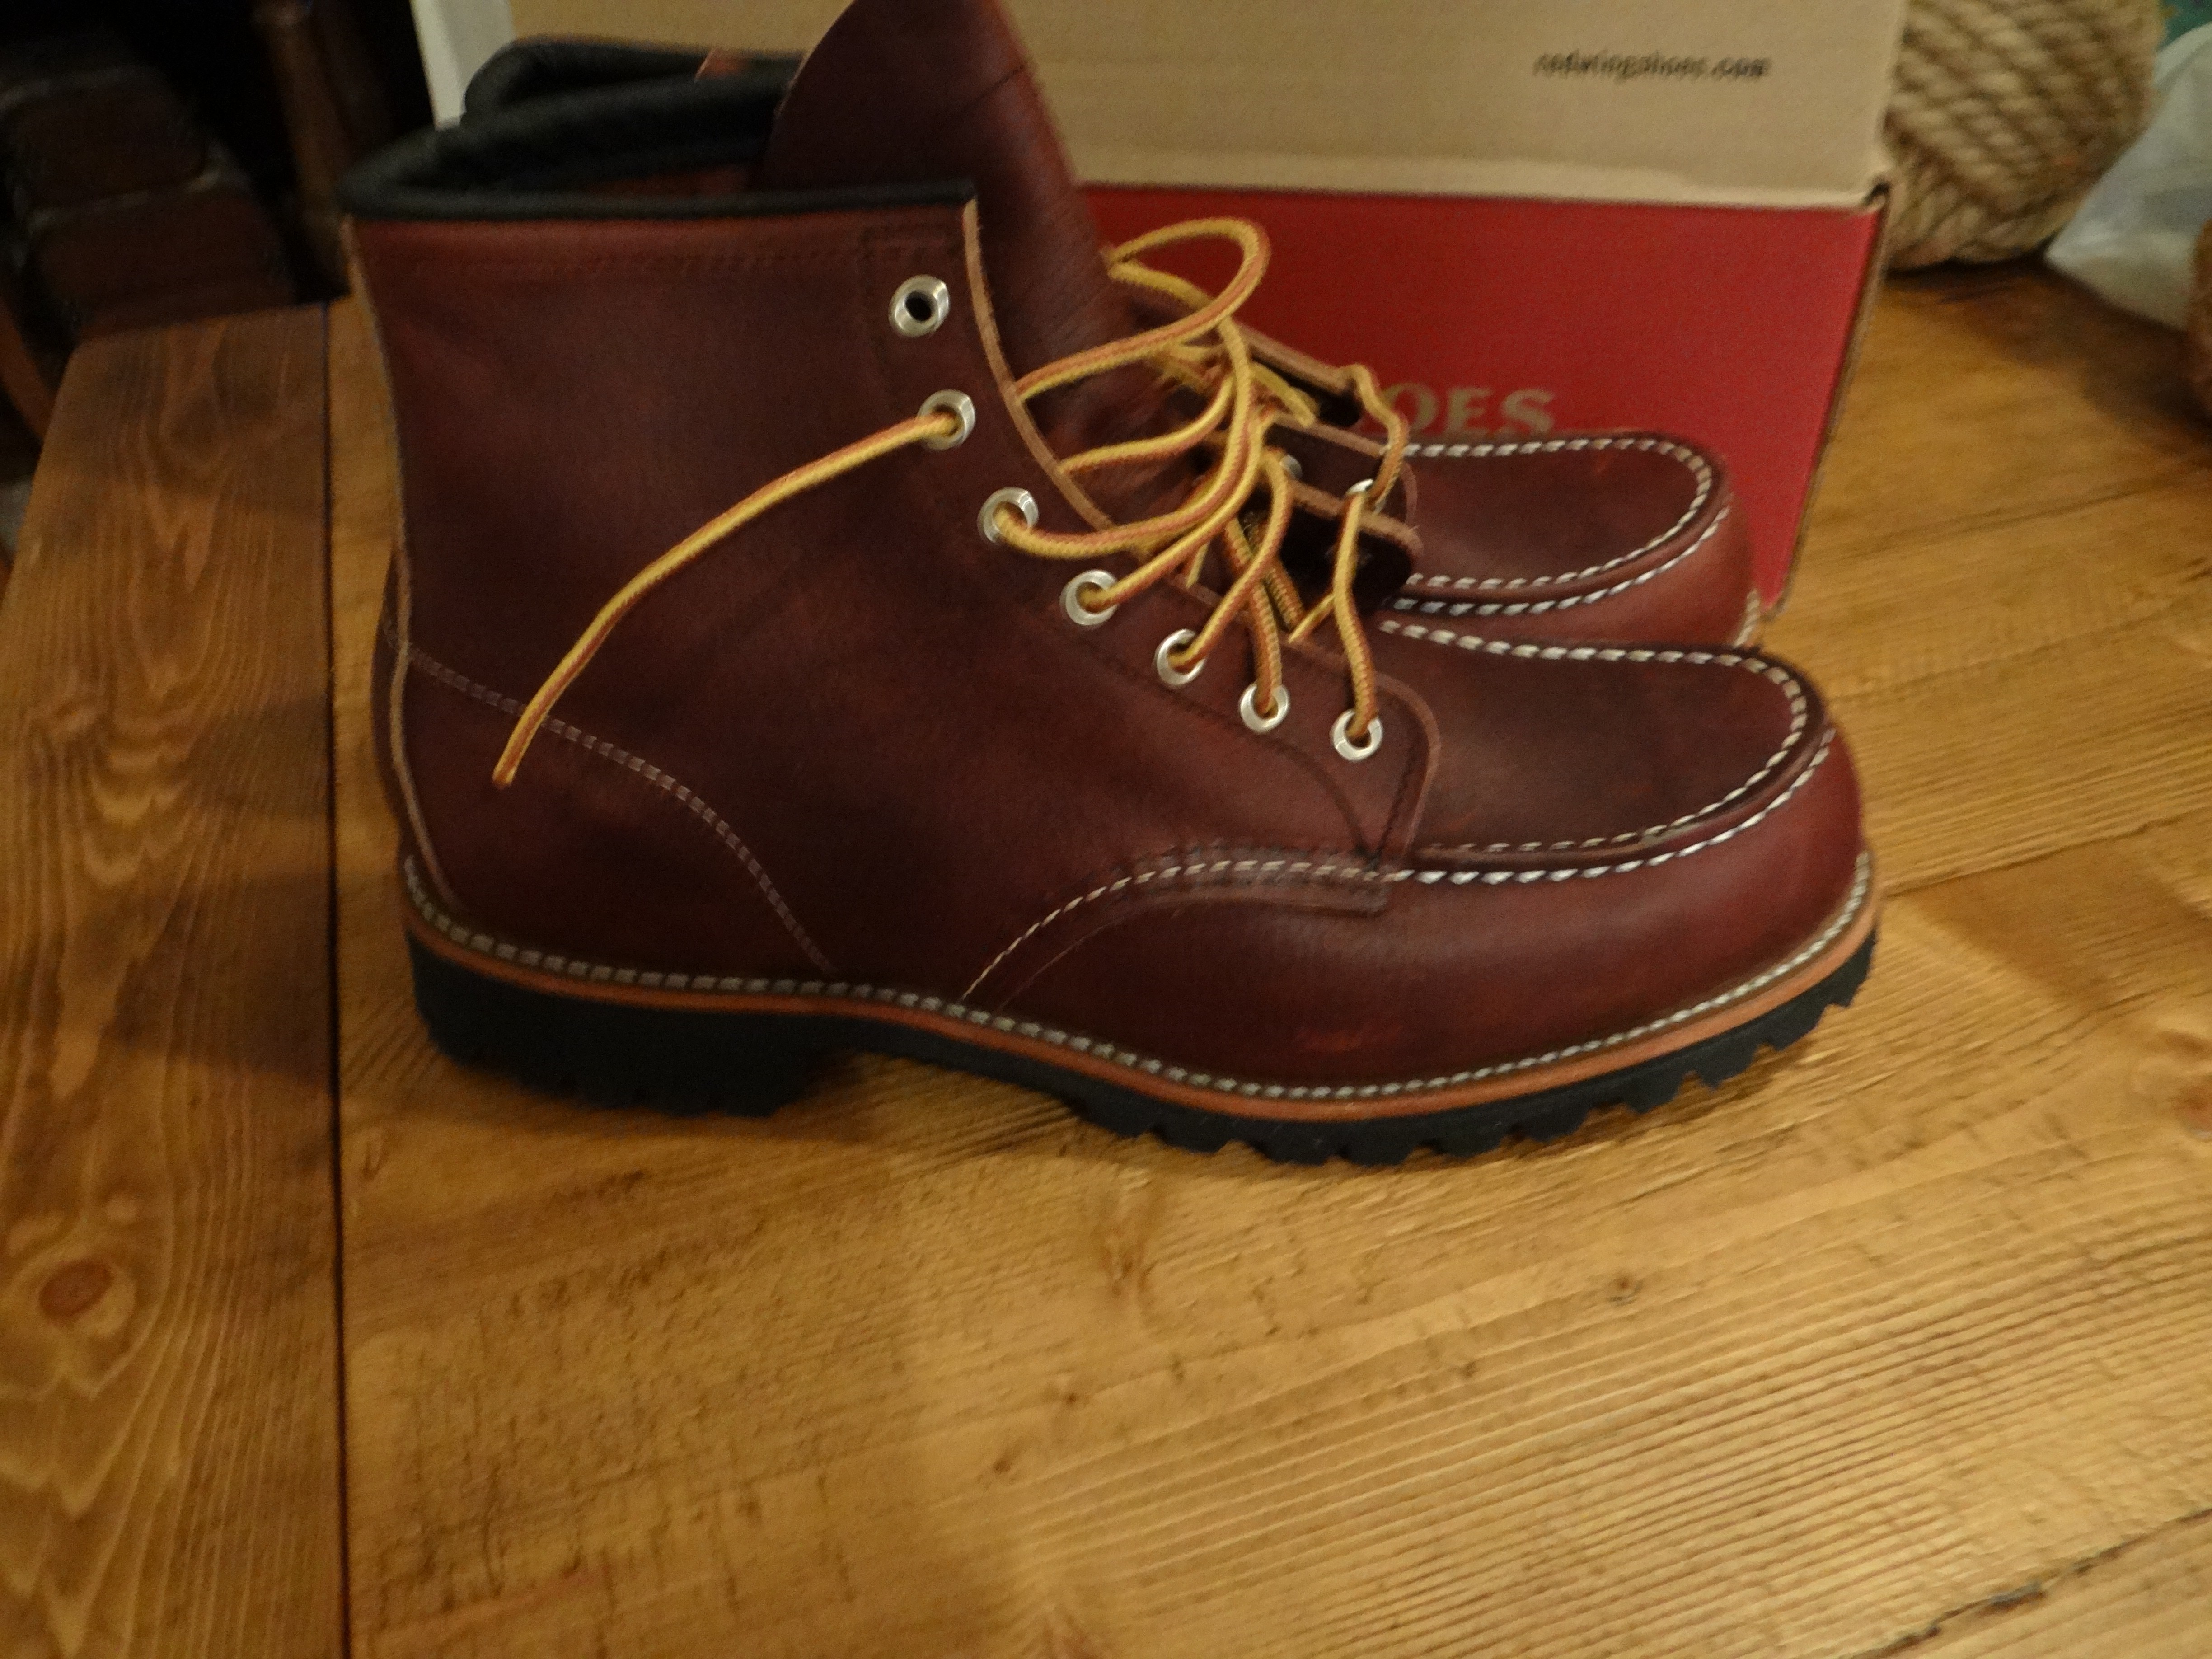 2 Pair of NIB Red Wing Boots Size 10.5D - 6